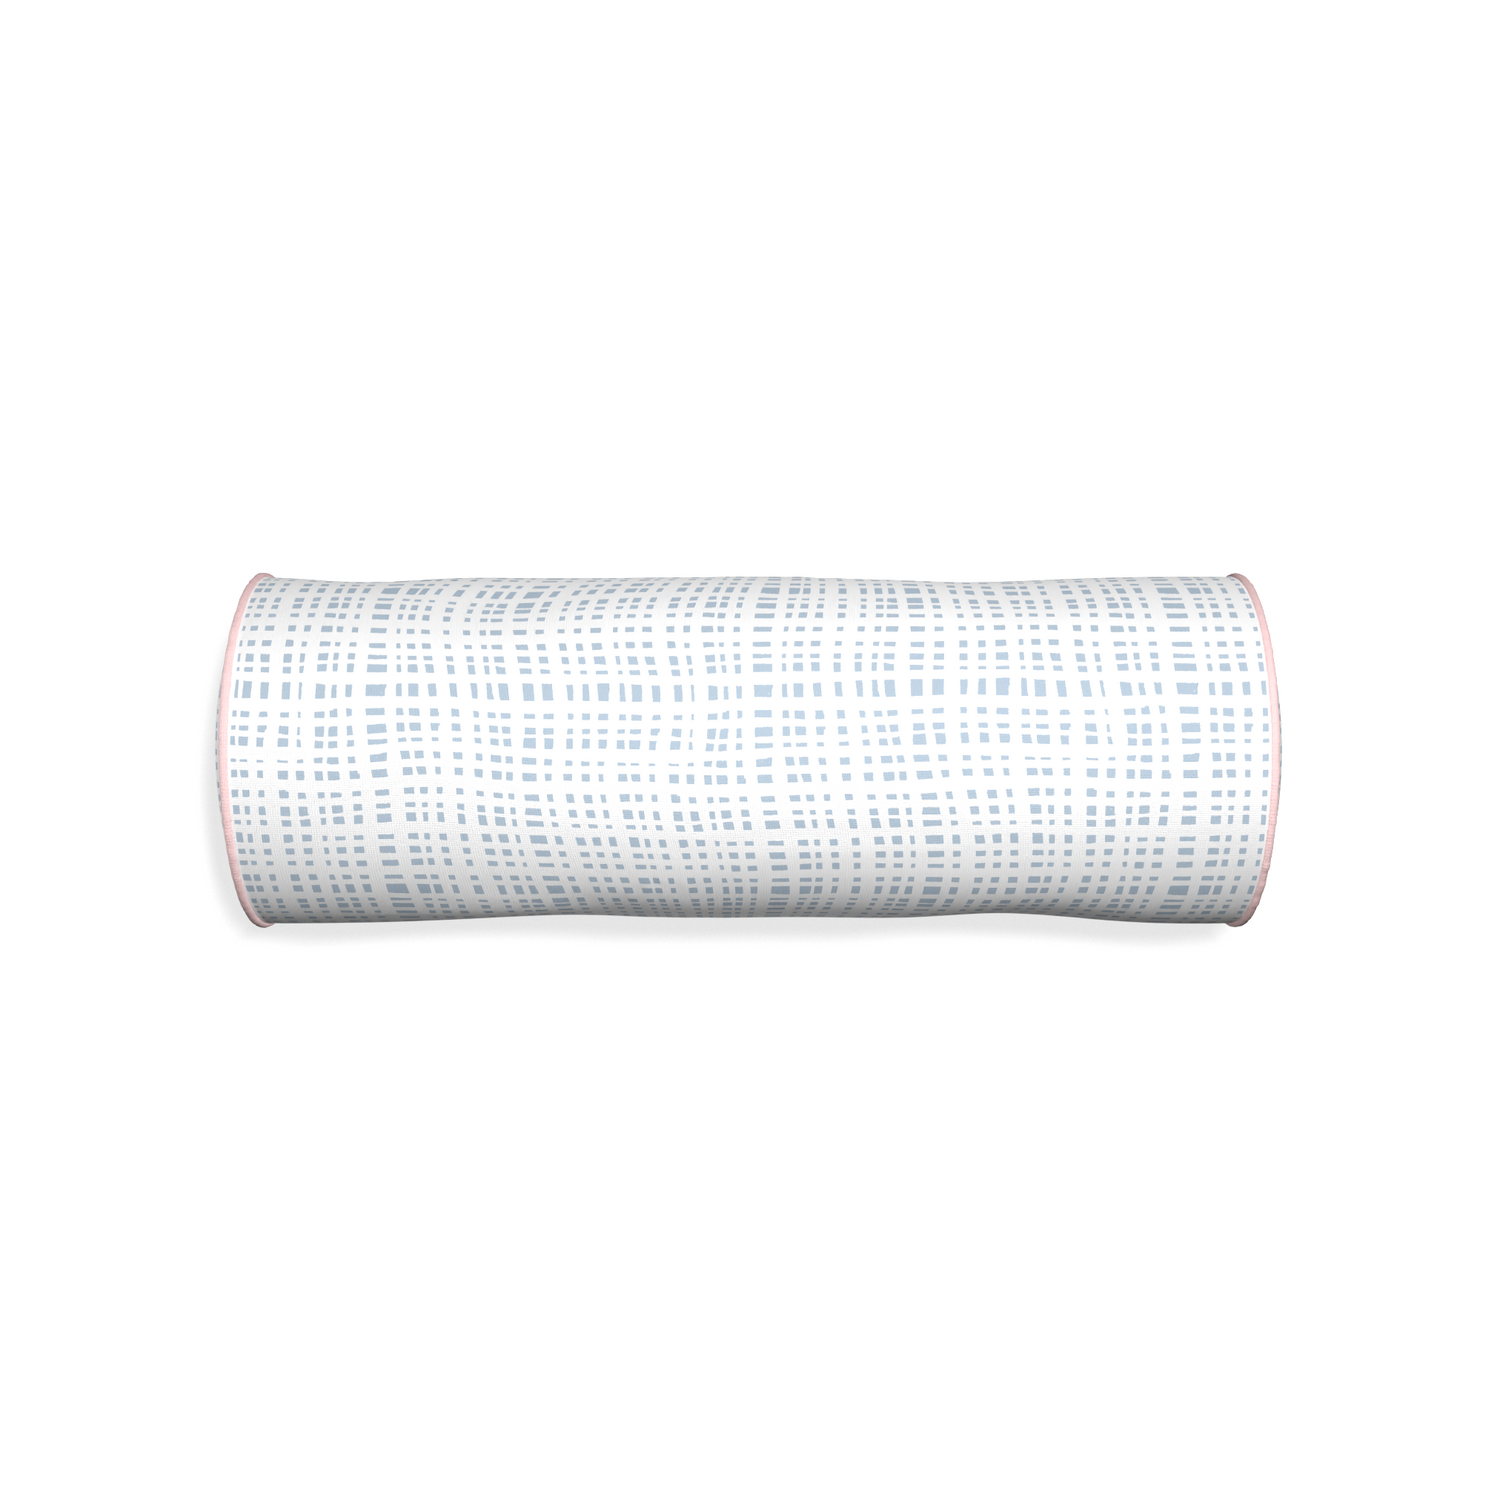 Bolster ginger custom plaid sky bluepillow with petal piping on white background